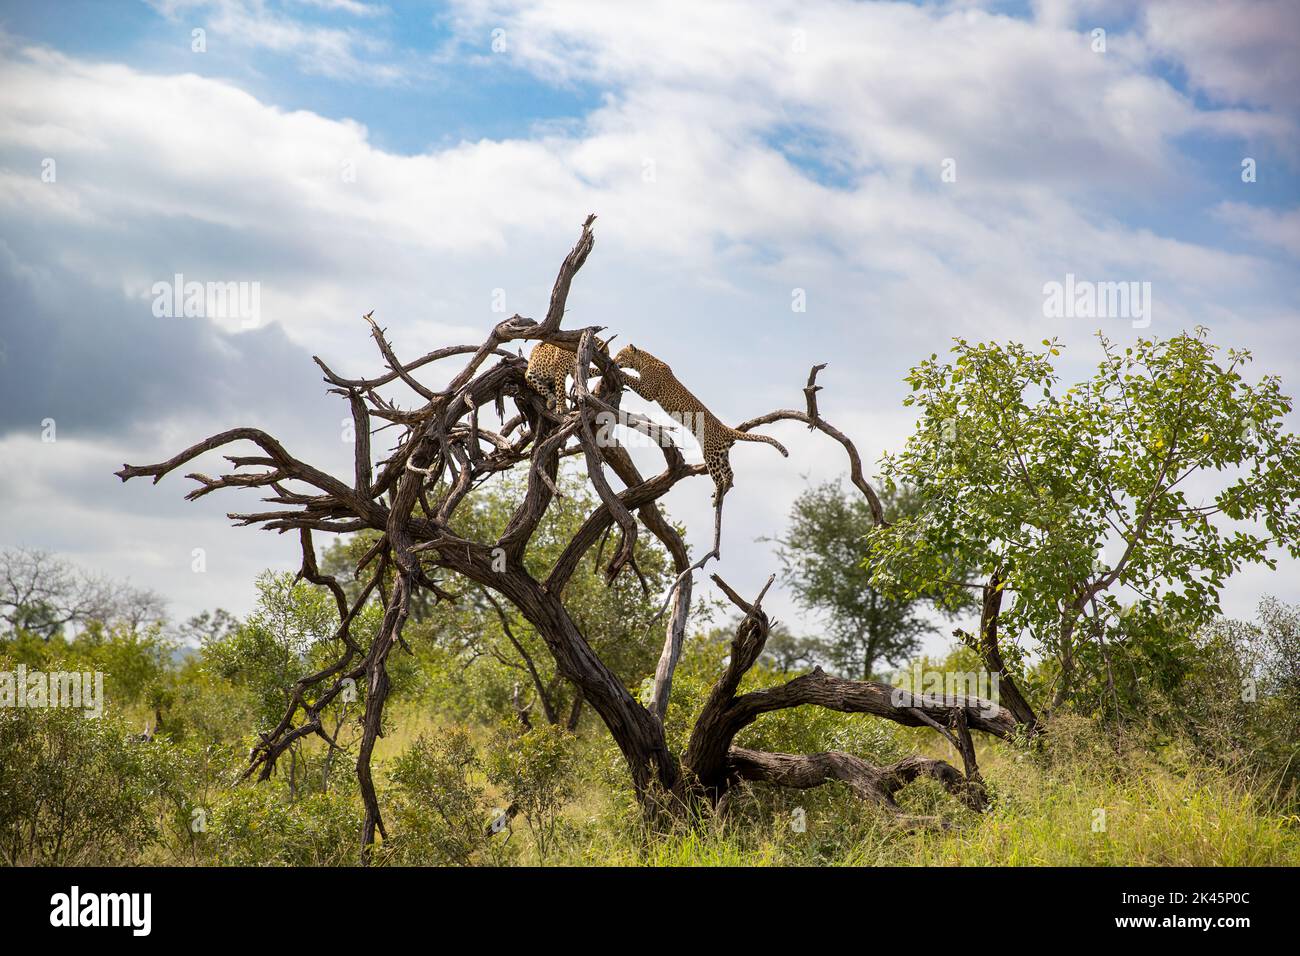 Two leopards, Panthera pardus, climb a dead tree Stock Photo